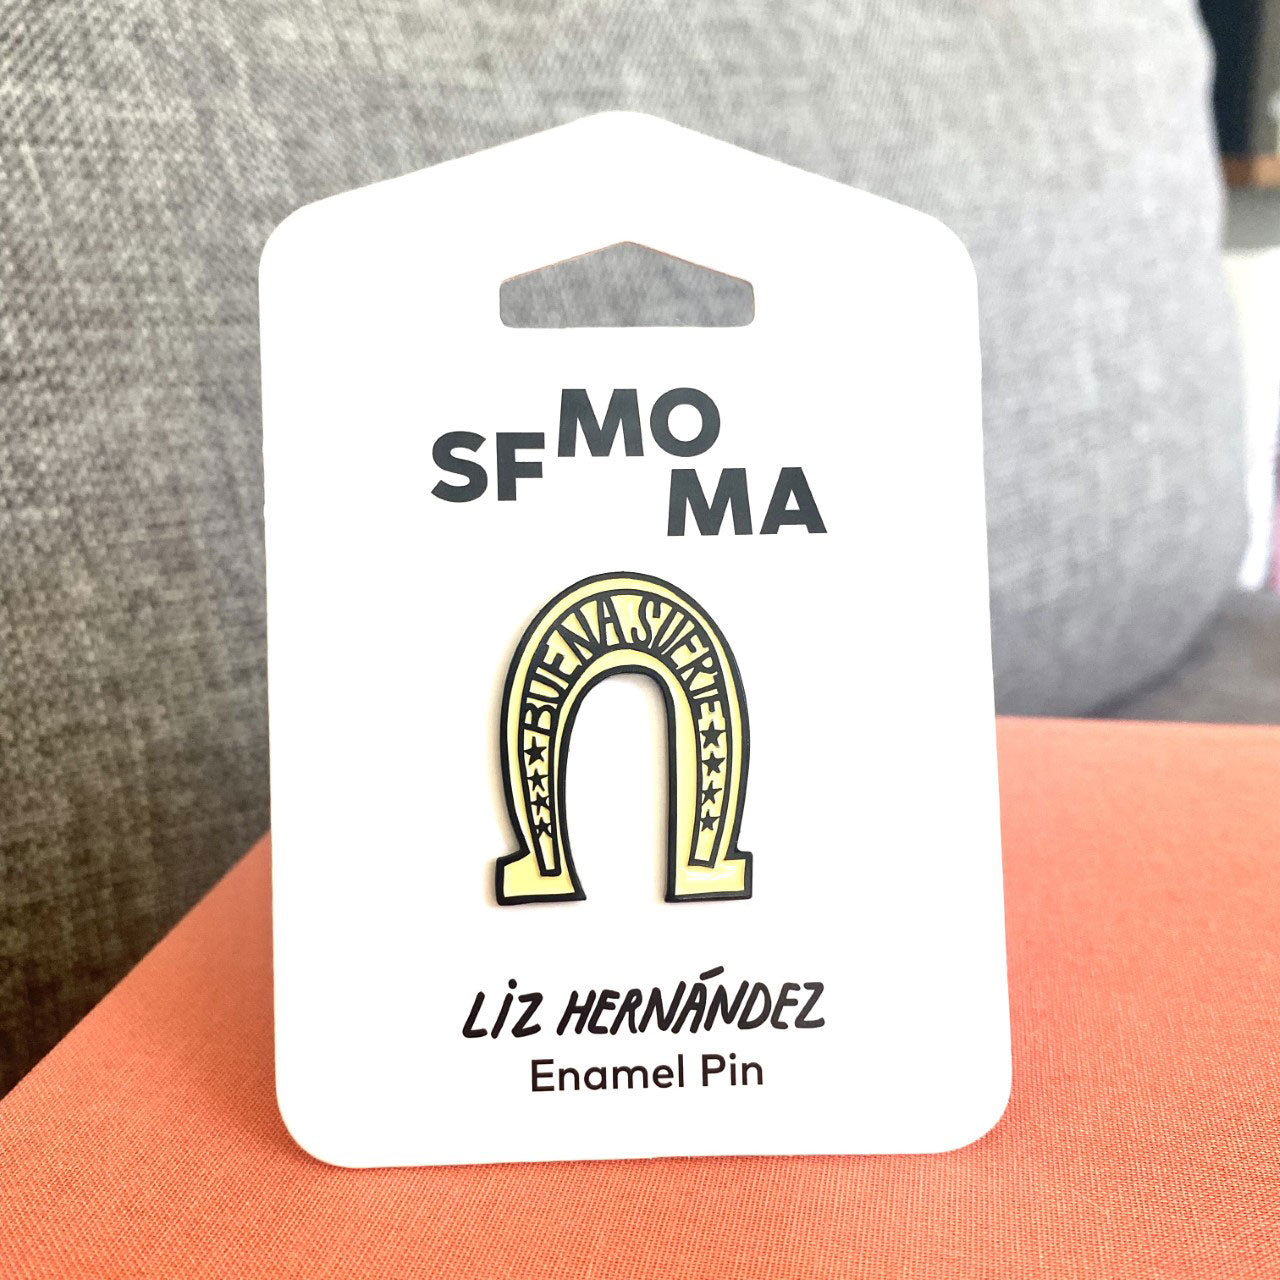 The Liz Hernández Buena Suerte Pin displayed with its packaging.